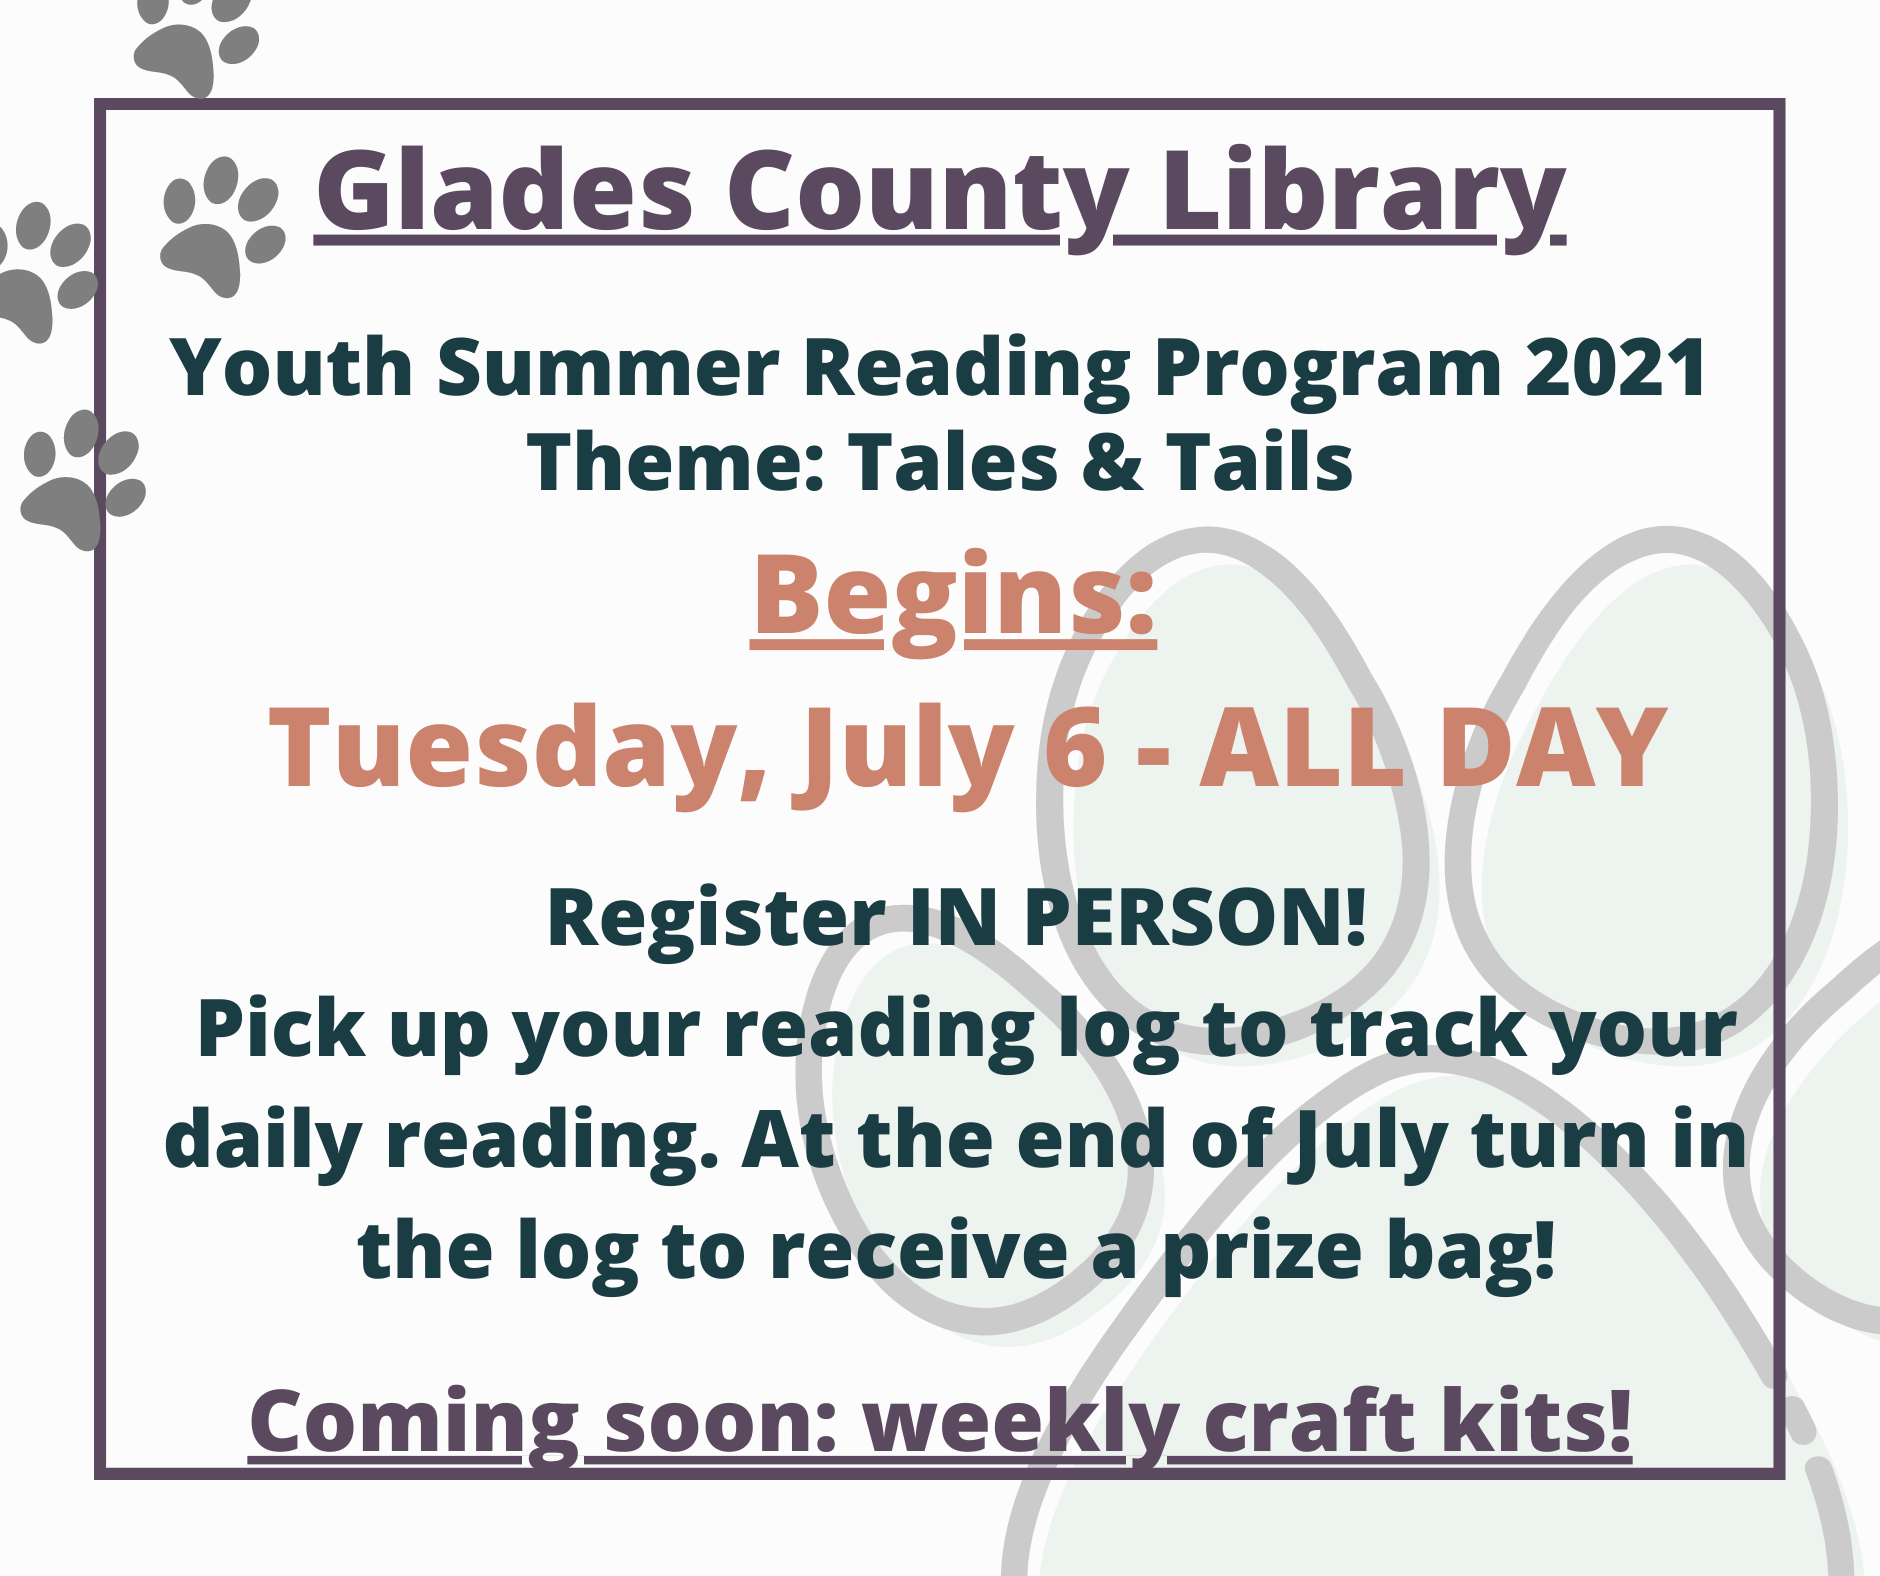 Beginning Tuesday, July 6 - ALL DAY - Register IN PERSON! - Pick up your reading log to track your daily reading. At the end of July turn in the log to receive a prize bag!  Coming soon: weekly craft kits!